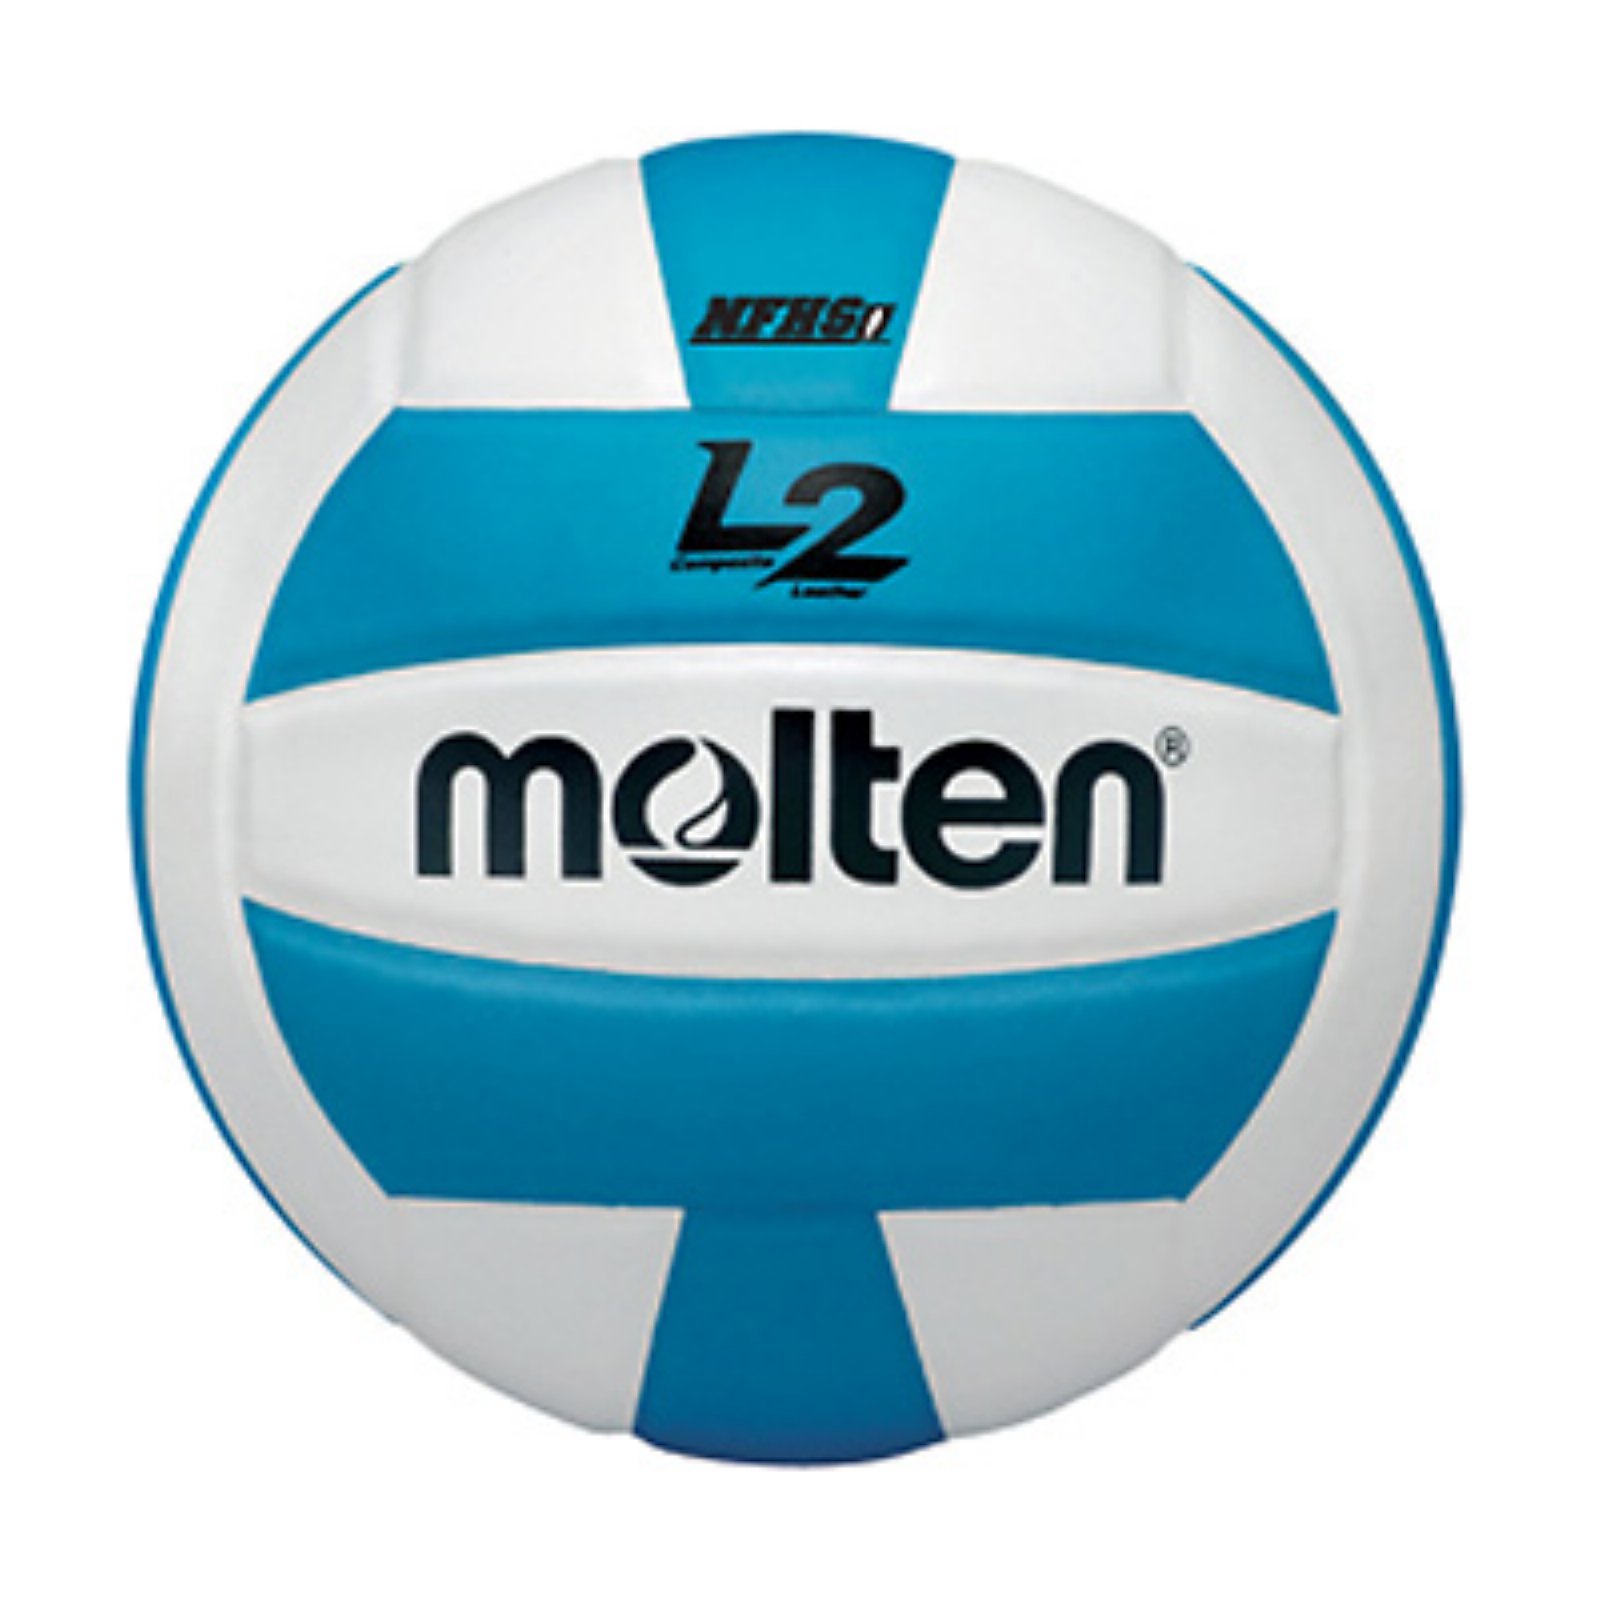 Molten L2 Series NFHS Approved Volleyball - image 1 of 2